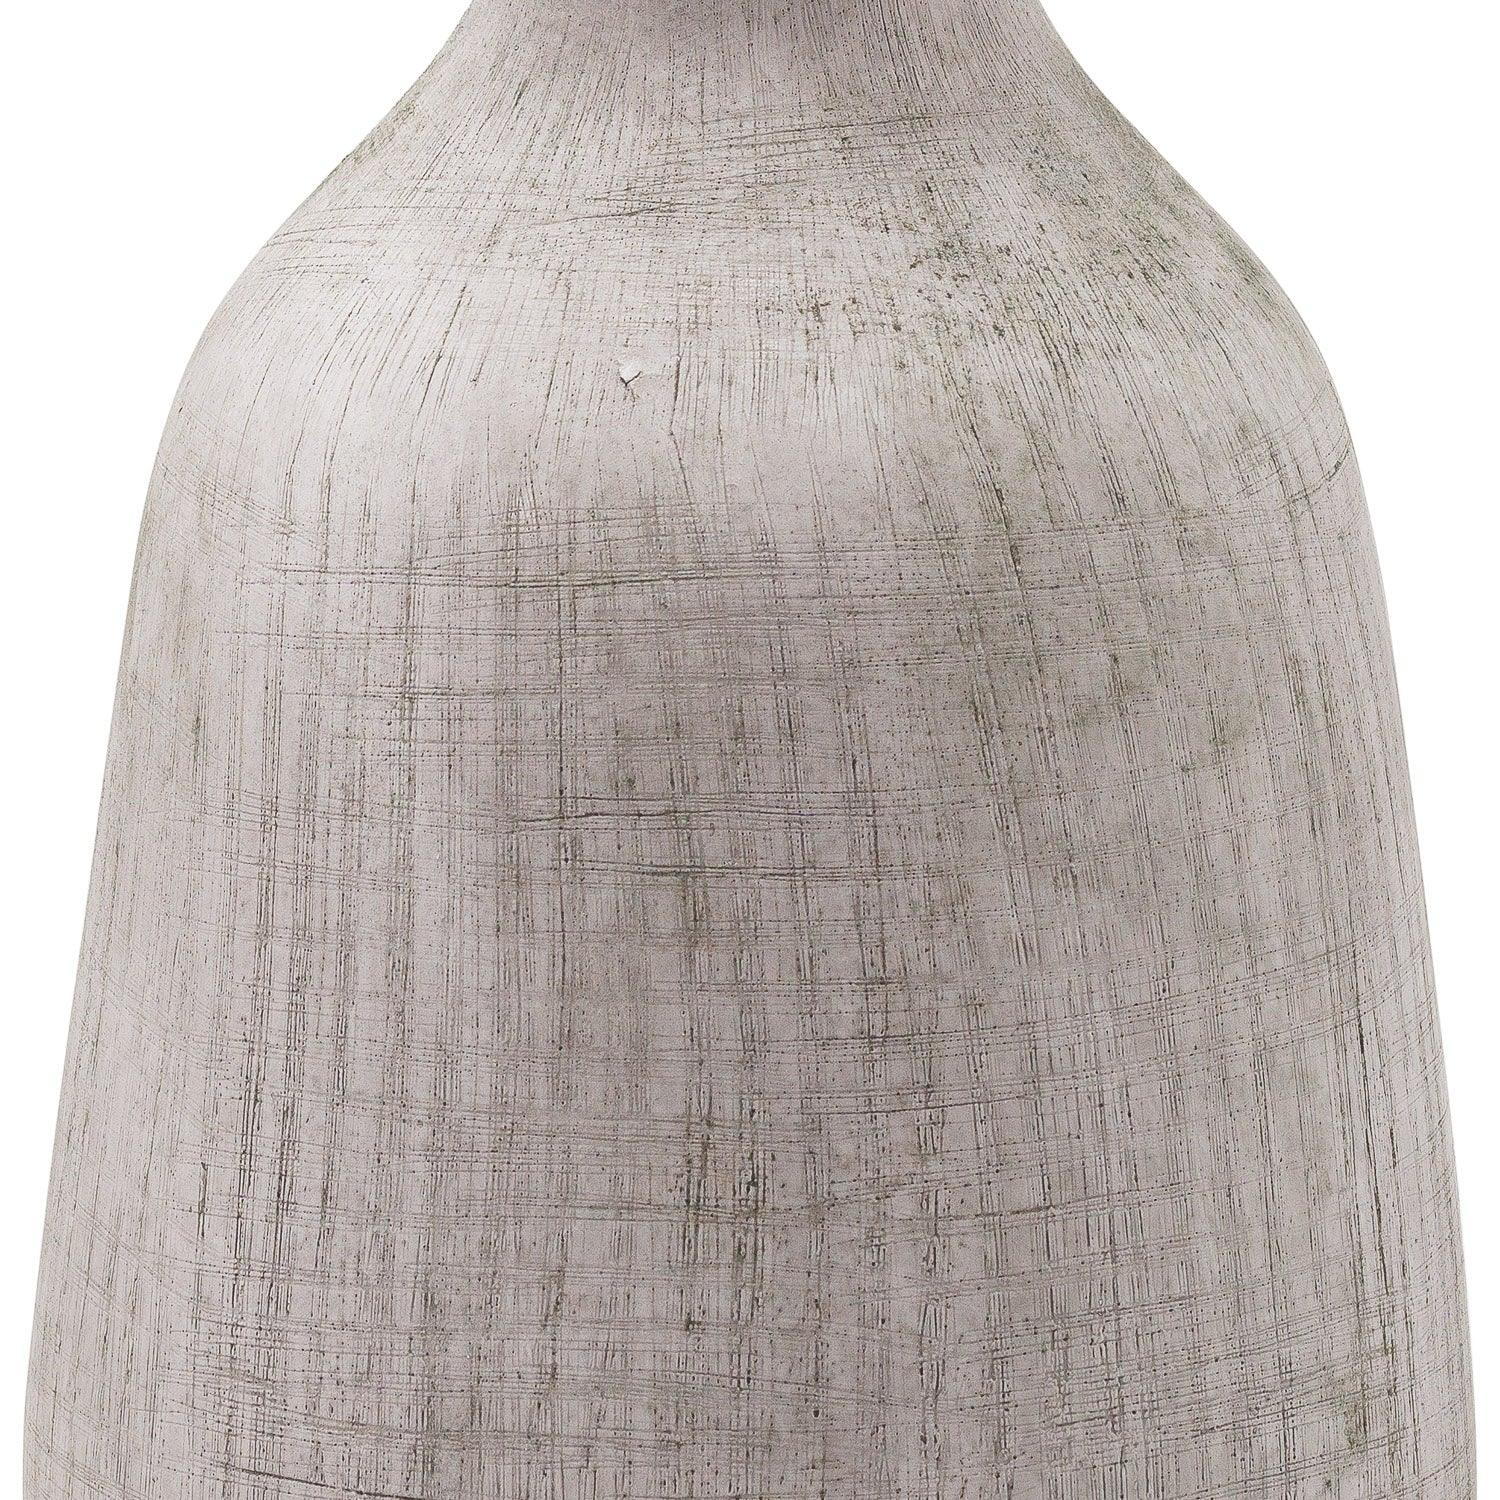 Bloomville Ople Stone Vase-Gifts & Accessories > Vases > Black Friday Vases and Planters